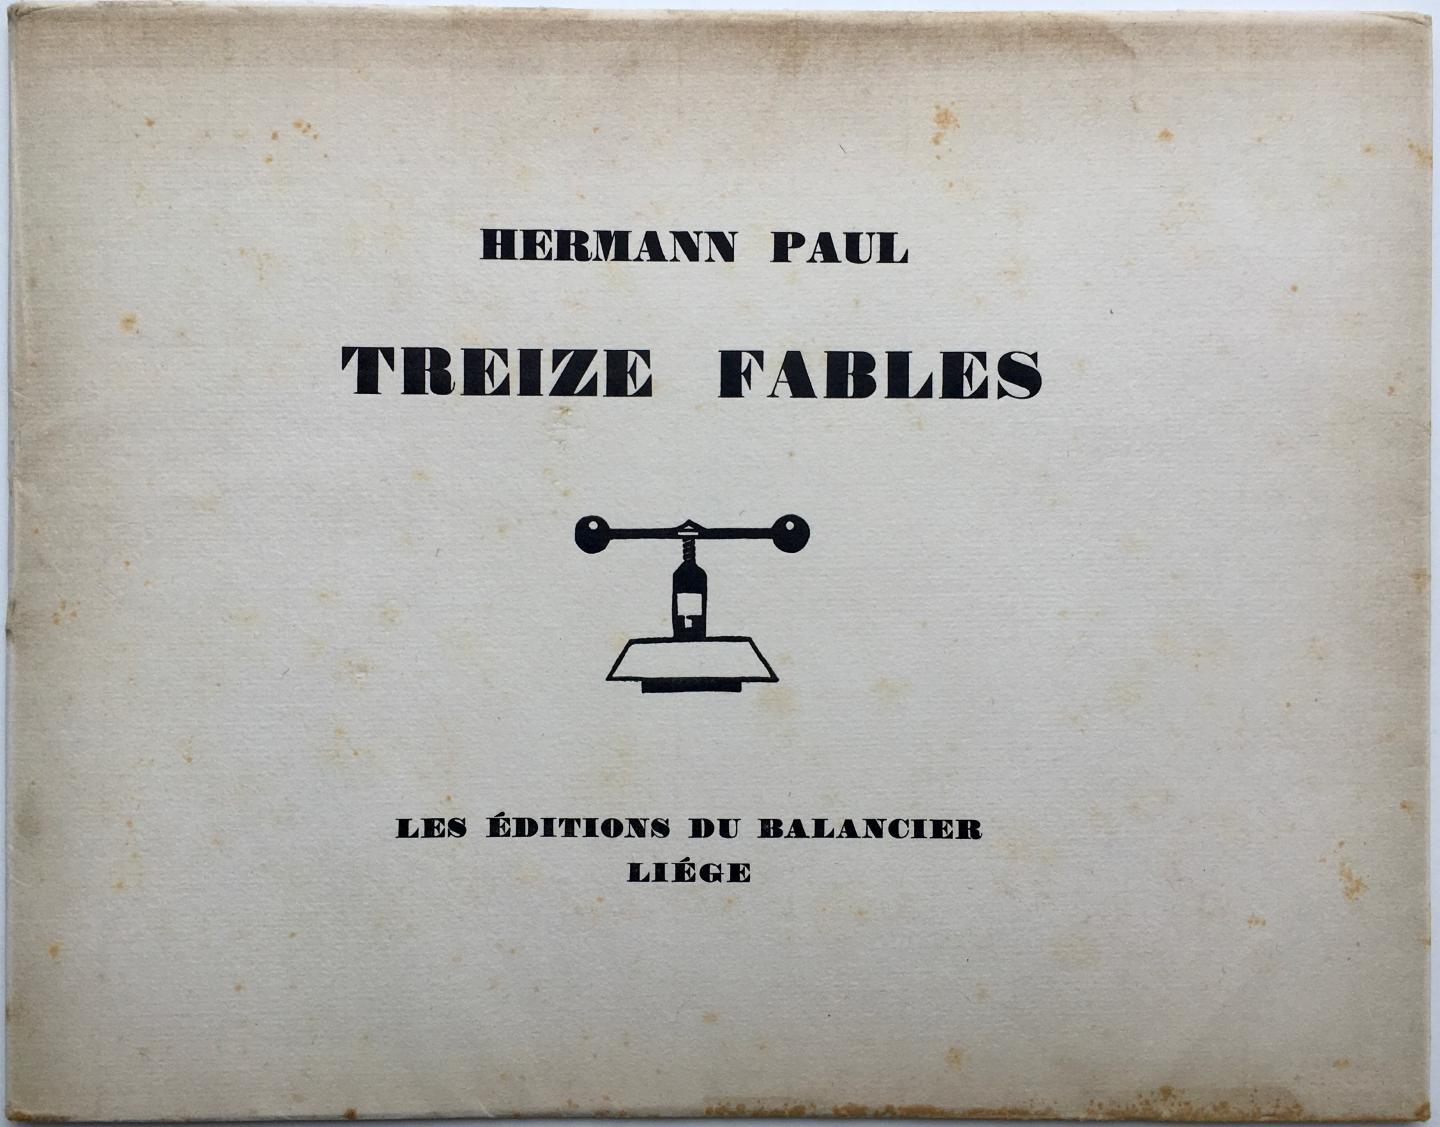 Hermann Paul. - Treize Fables. With 13 large woodcut plates by Hermann Paul, each wrapped in a china paper wrapper, with a cynical printed text on the upper side.